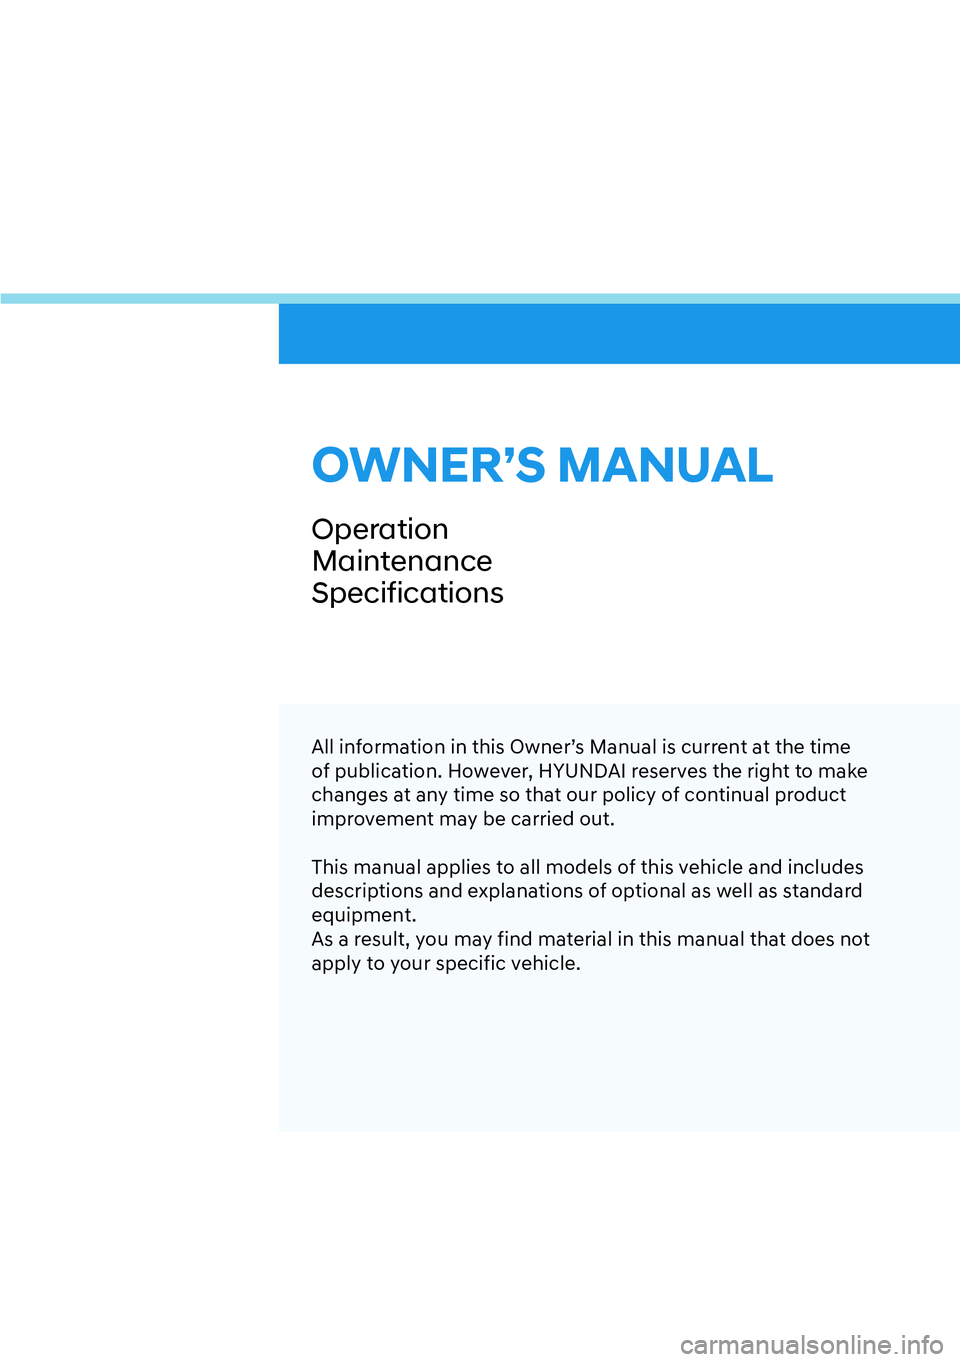 HYUNDAI KONA 2023  Owners Manual All information in this Owner’s Manual is current at the time 
of publication. However, HYUNDAI reserves the right to make 
changes at any time so that our policy of continual product 
improvement m